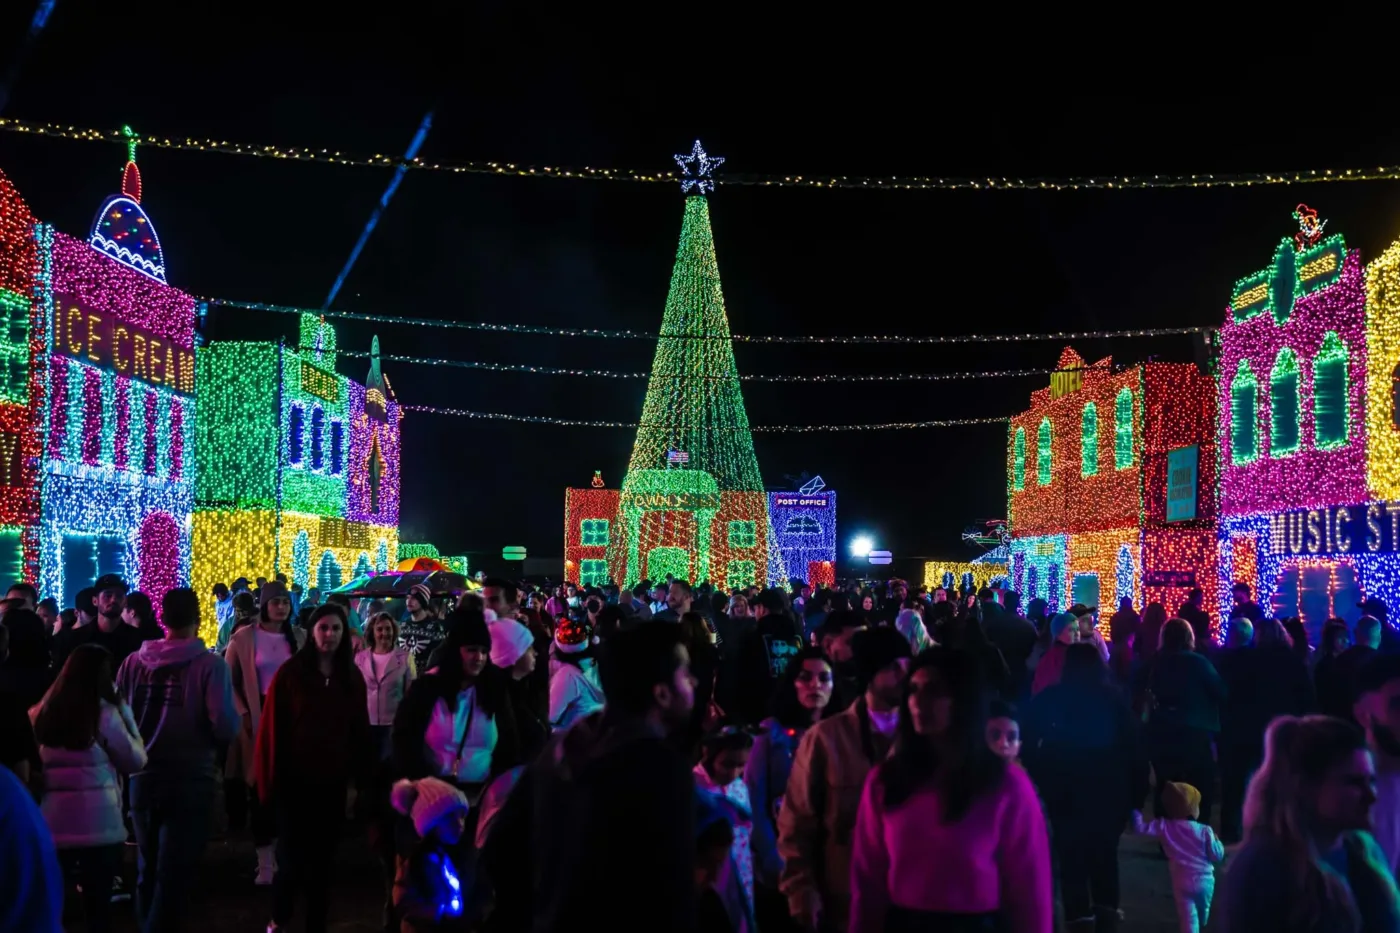 Twinkle towns: Your holiday light display guide for Phoenix & Tucson